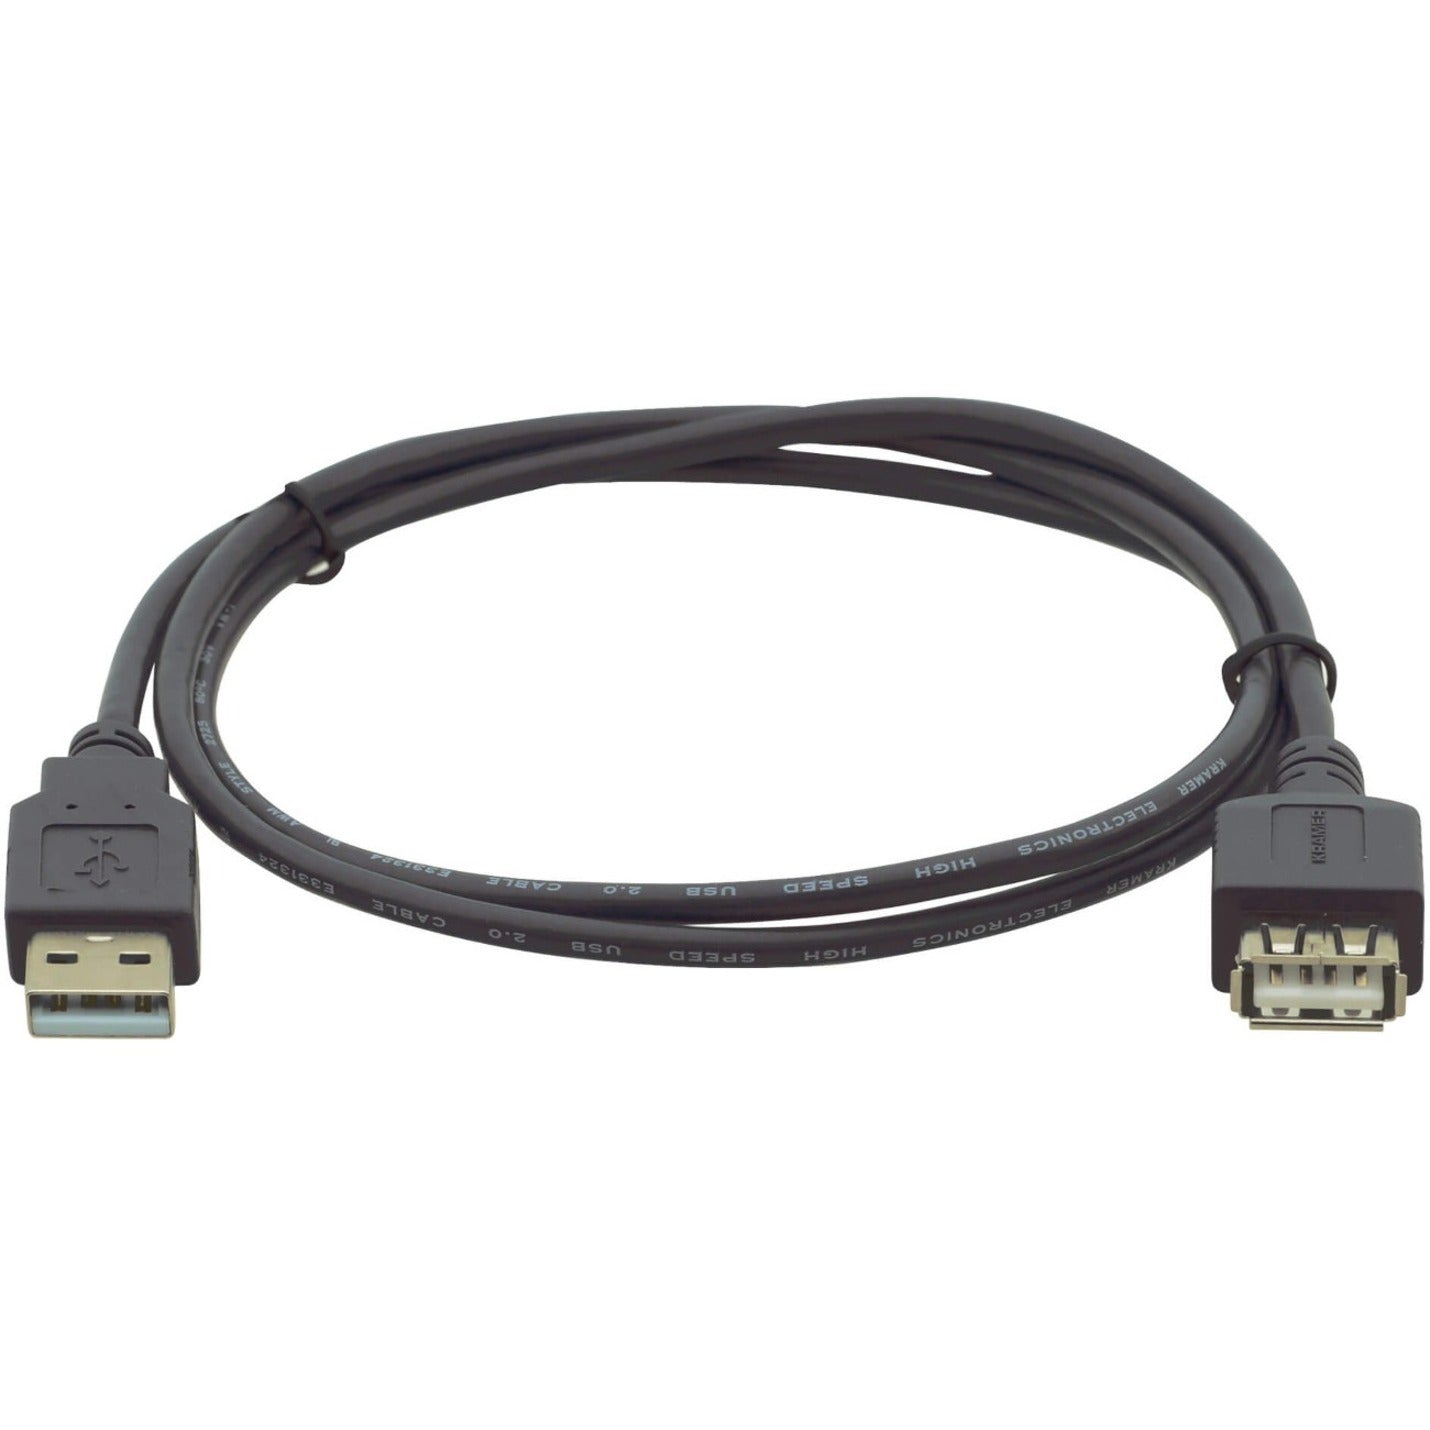 Kramer 96-02121010 USB 2.0 A (M) to A (F) Extension Cable, 10 ft, Strain Relief, EMI/RF Protection